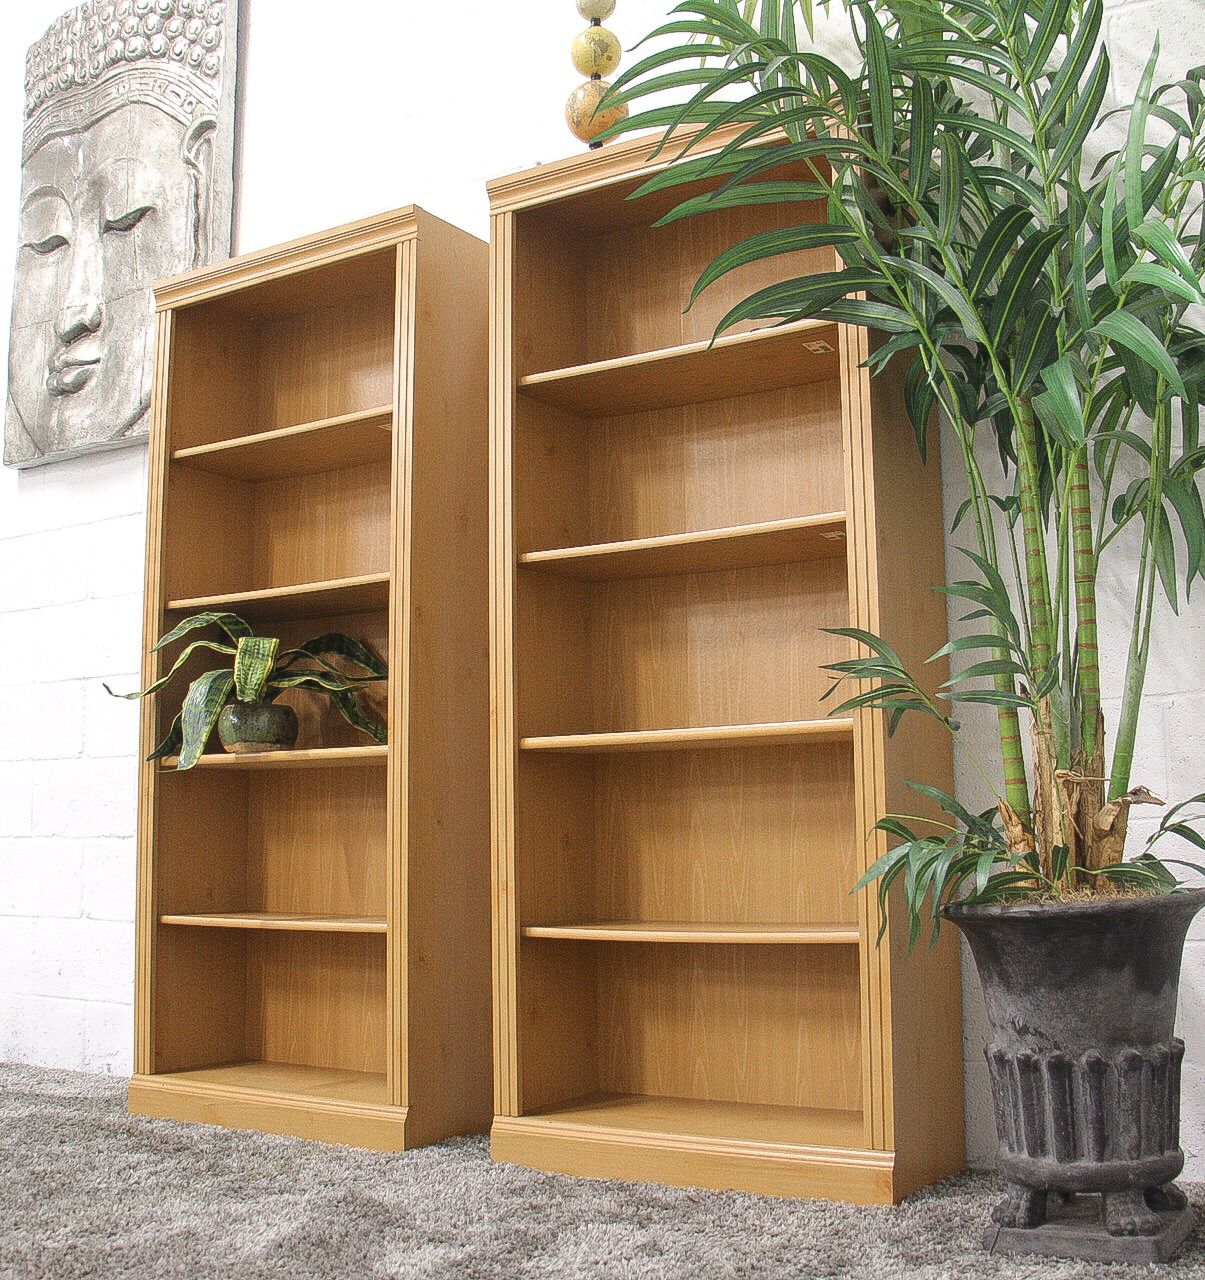 ***Set of 5-Shelf Bookcases (Free Delivery)